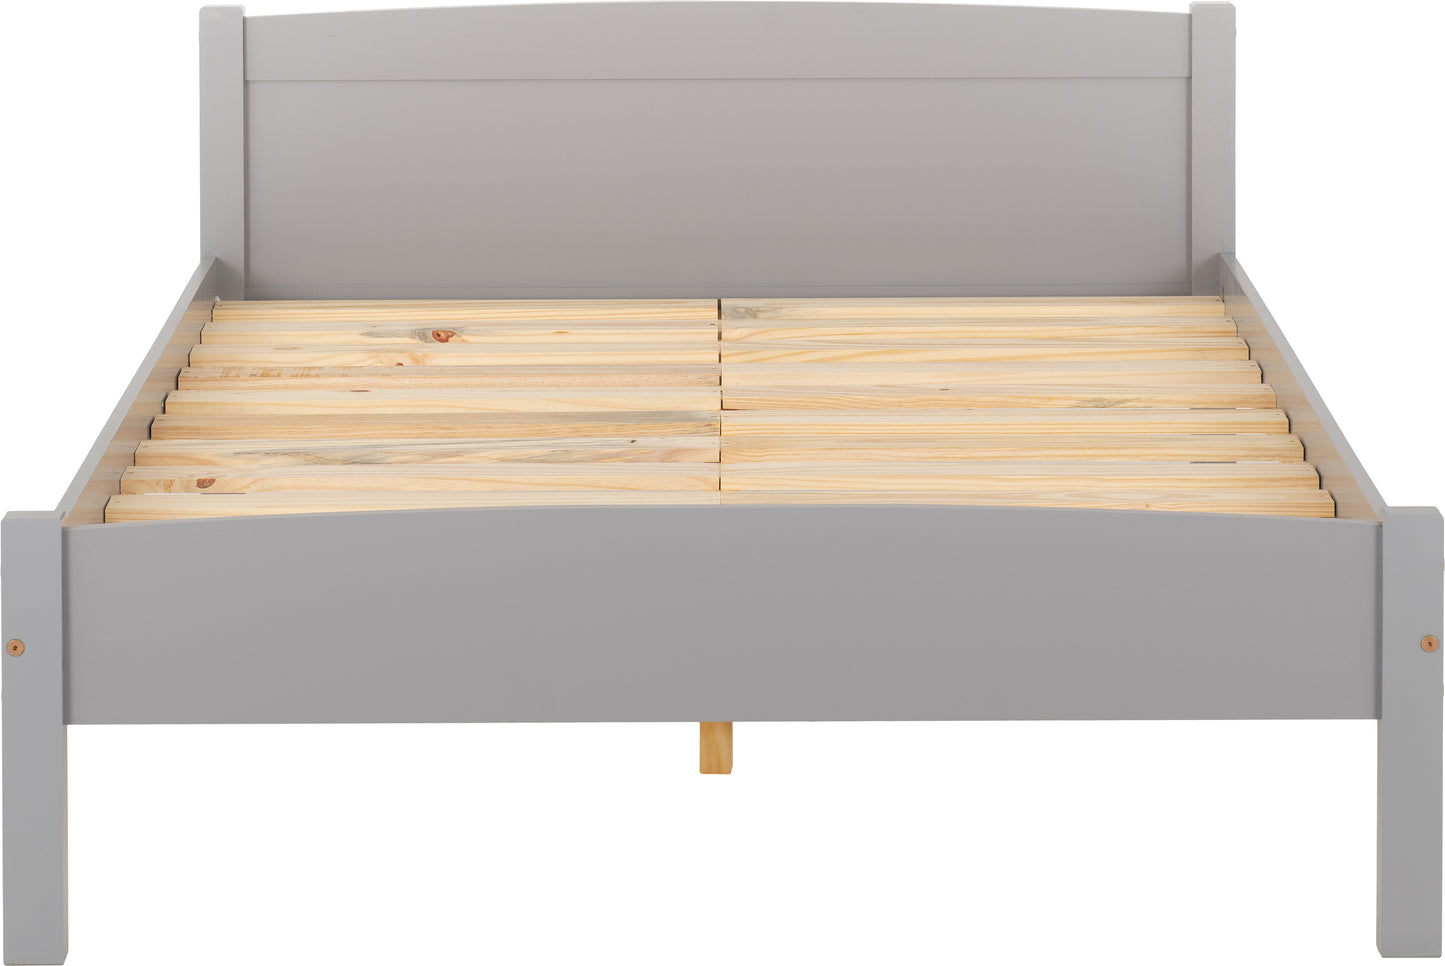 AMBER 4'6" BED - ANTIQUE PINE